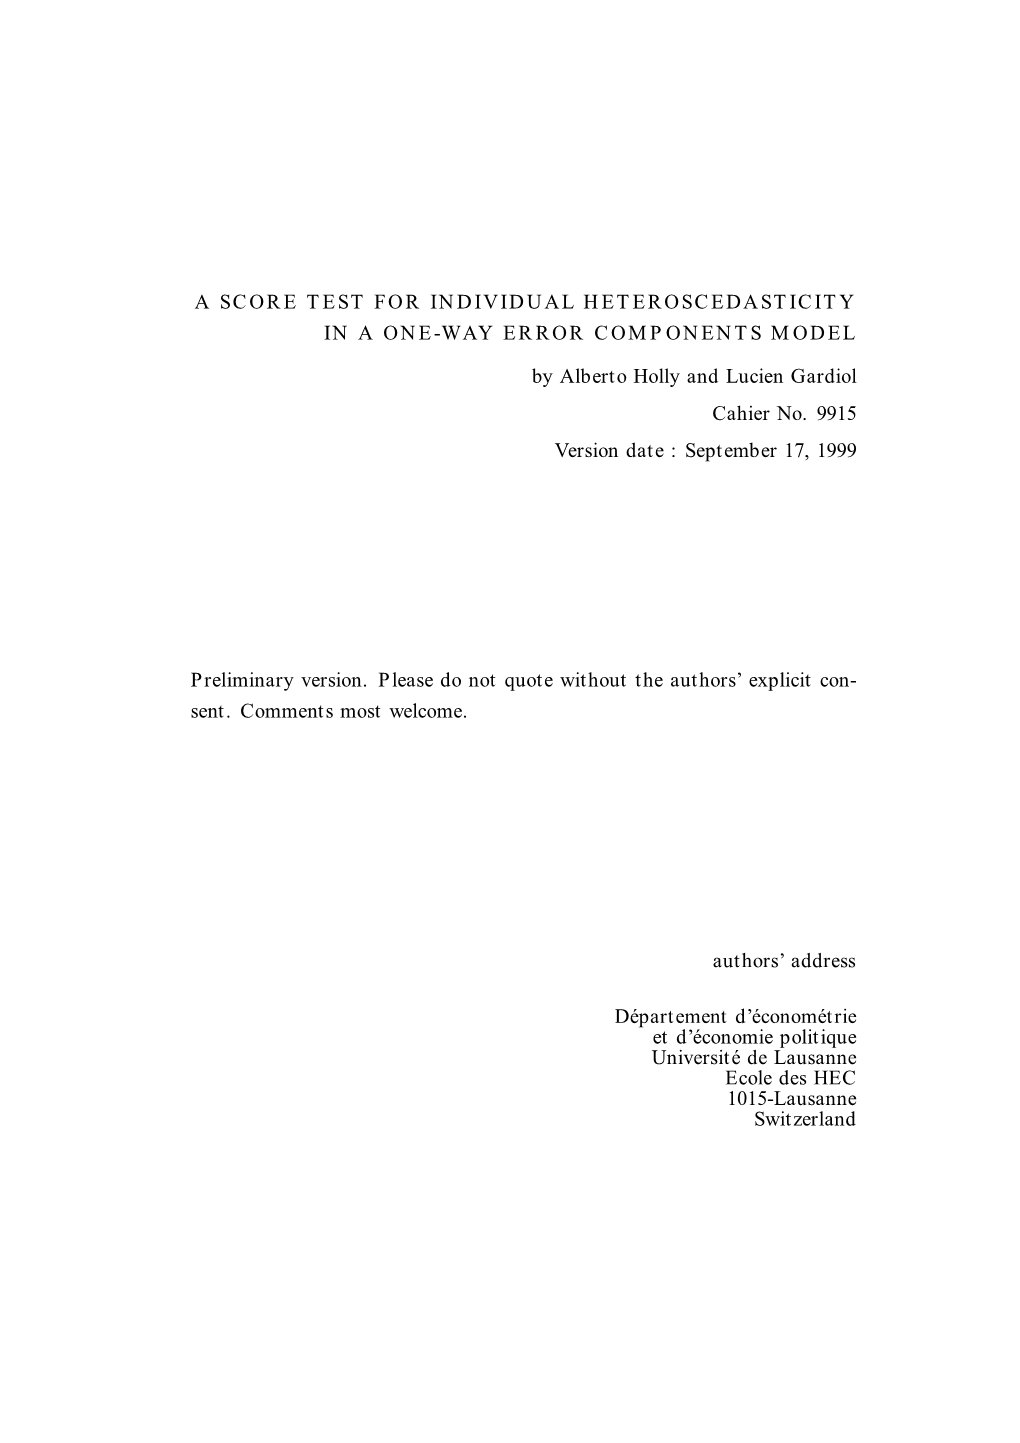 A SCORE TEST for INDIVIDUAL HETEROSCEDASTICITY in a ONE-WAY ERROR COMPONENTS MODEL by Alberto Holly and Lucien Gardiol Cahier No